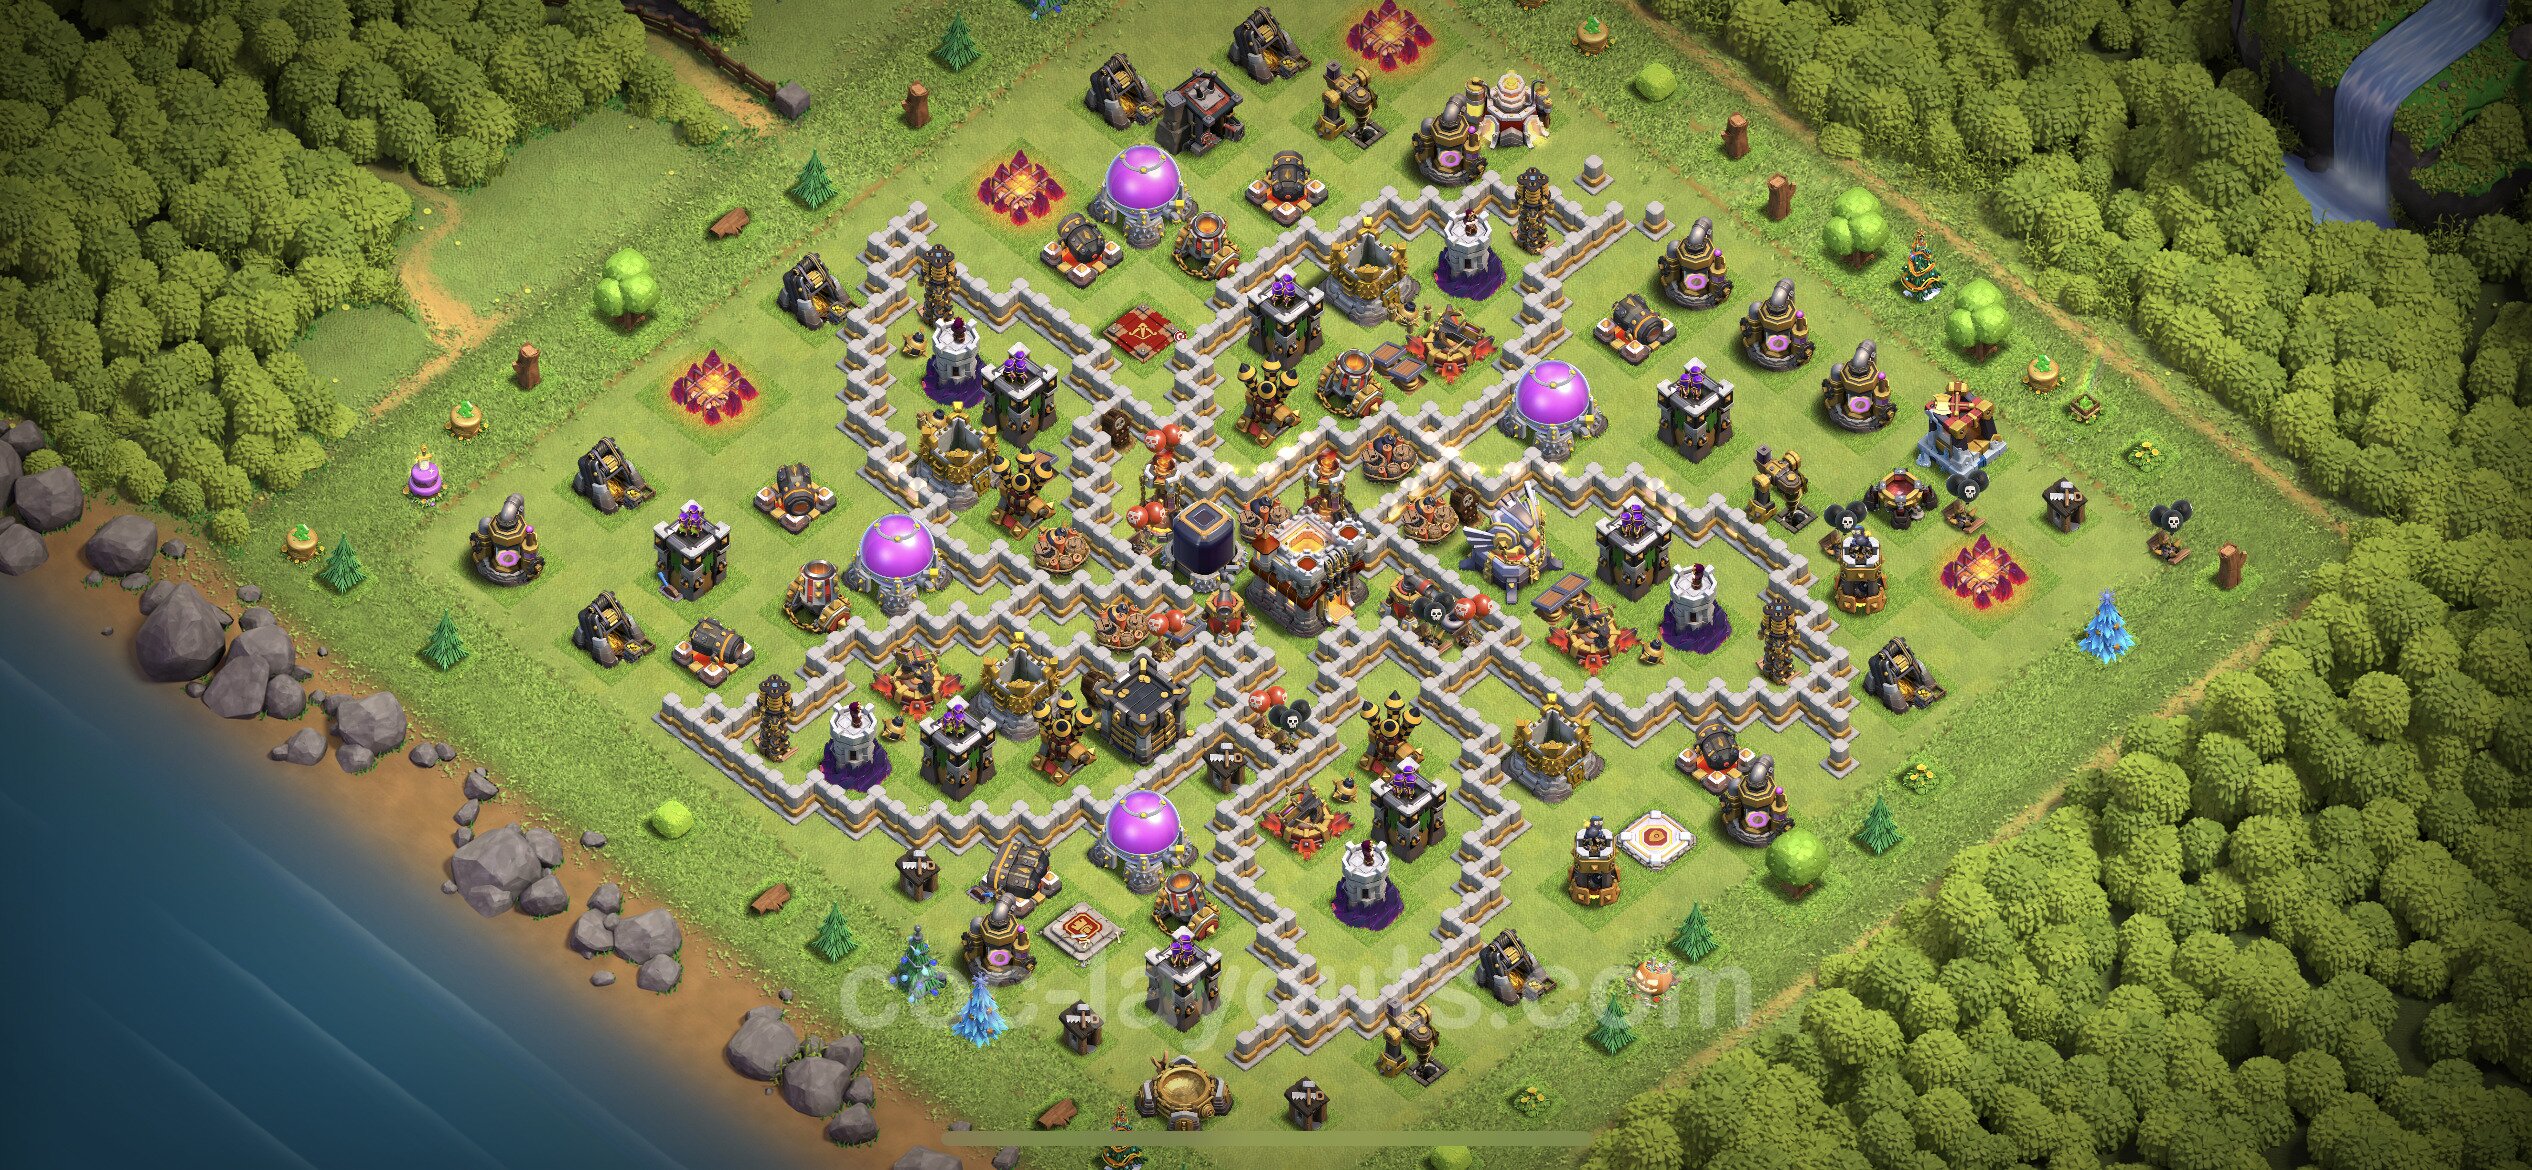 Best Funny Troll Base TH11 with Link - Town Hall Level 11 Art Base Copy -  (#4)